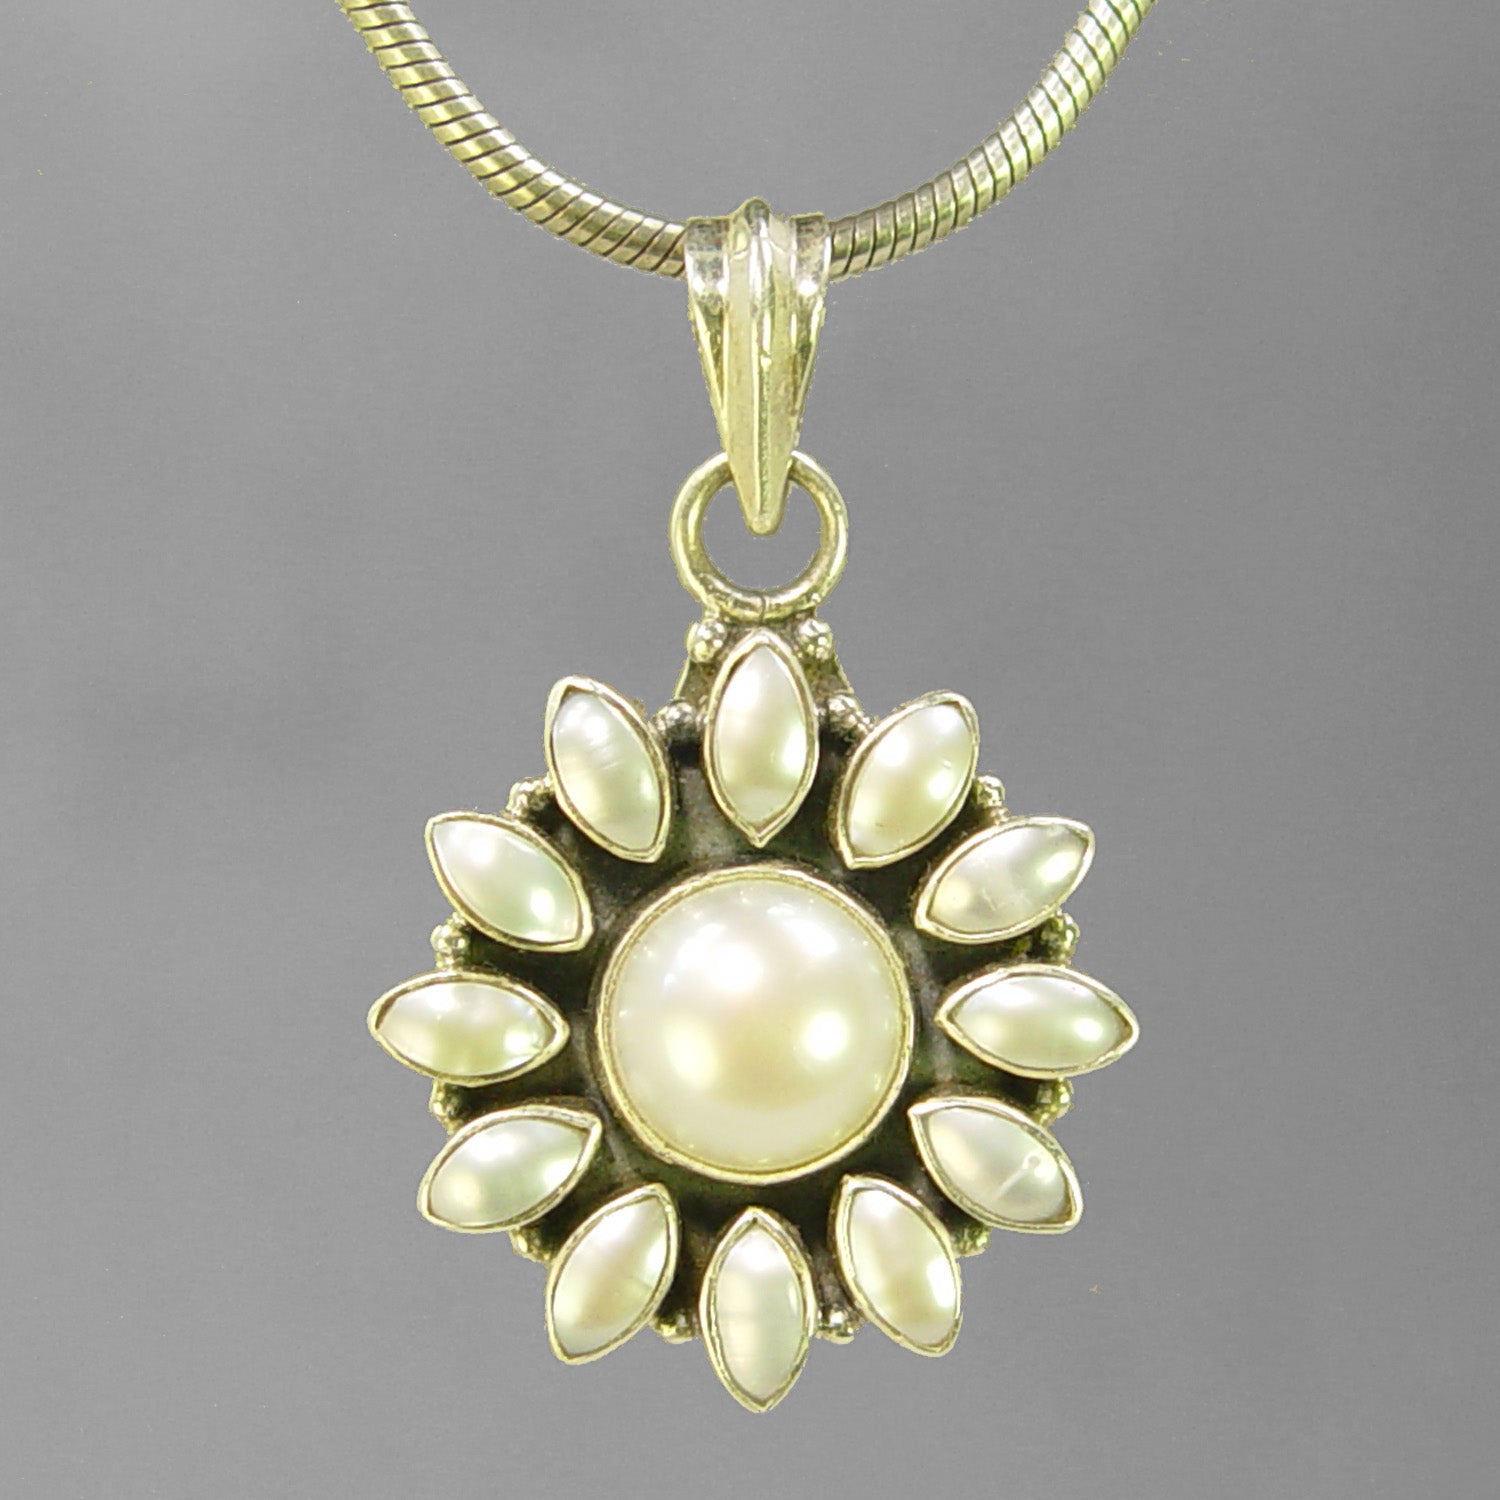 Pearl 6 ct Bezel Set With 12 Small Pearls Sterling Silver Pendant